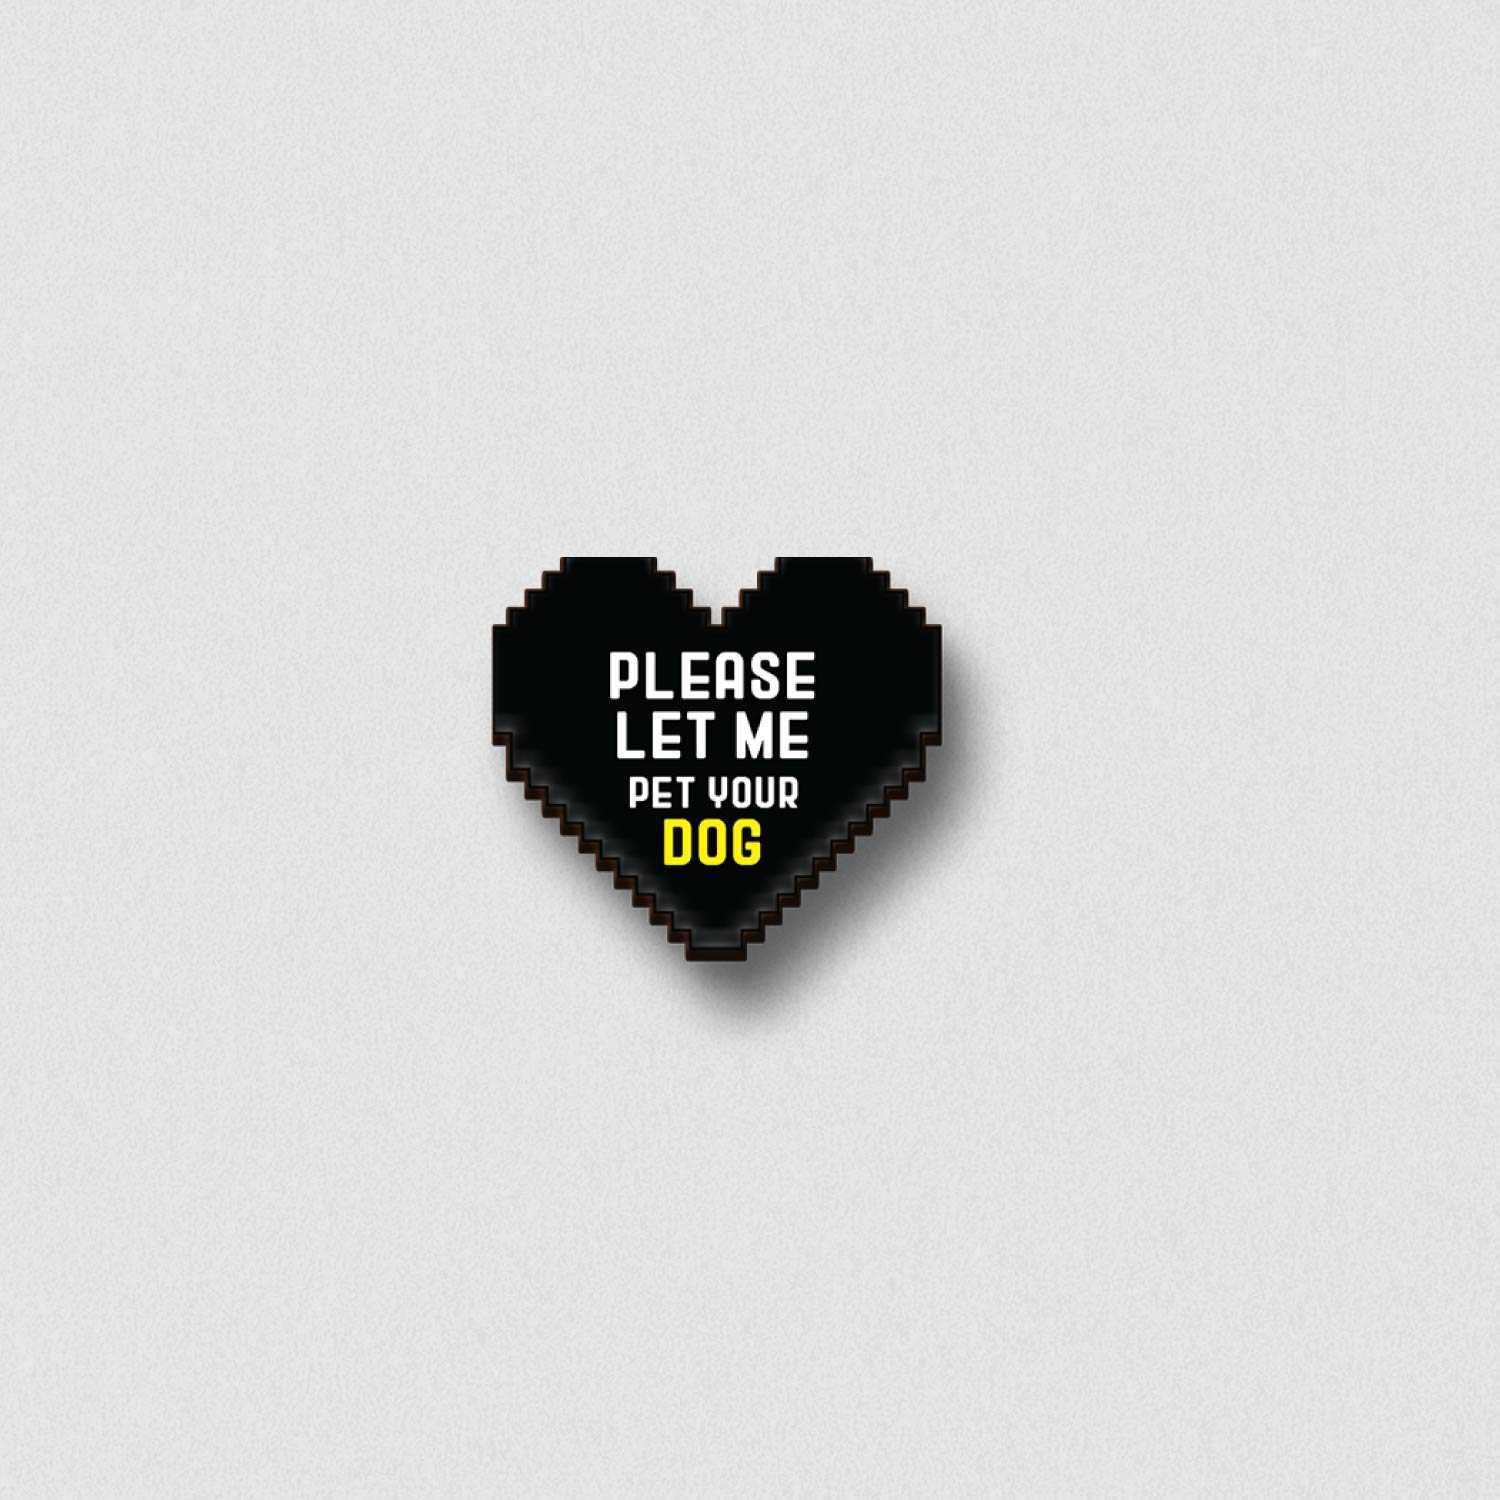 The Let Me Pet Your Dog Pin